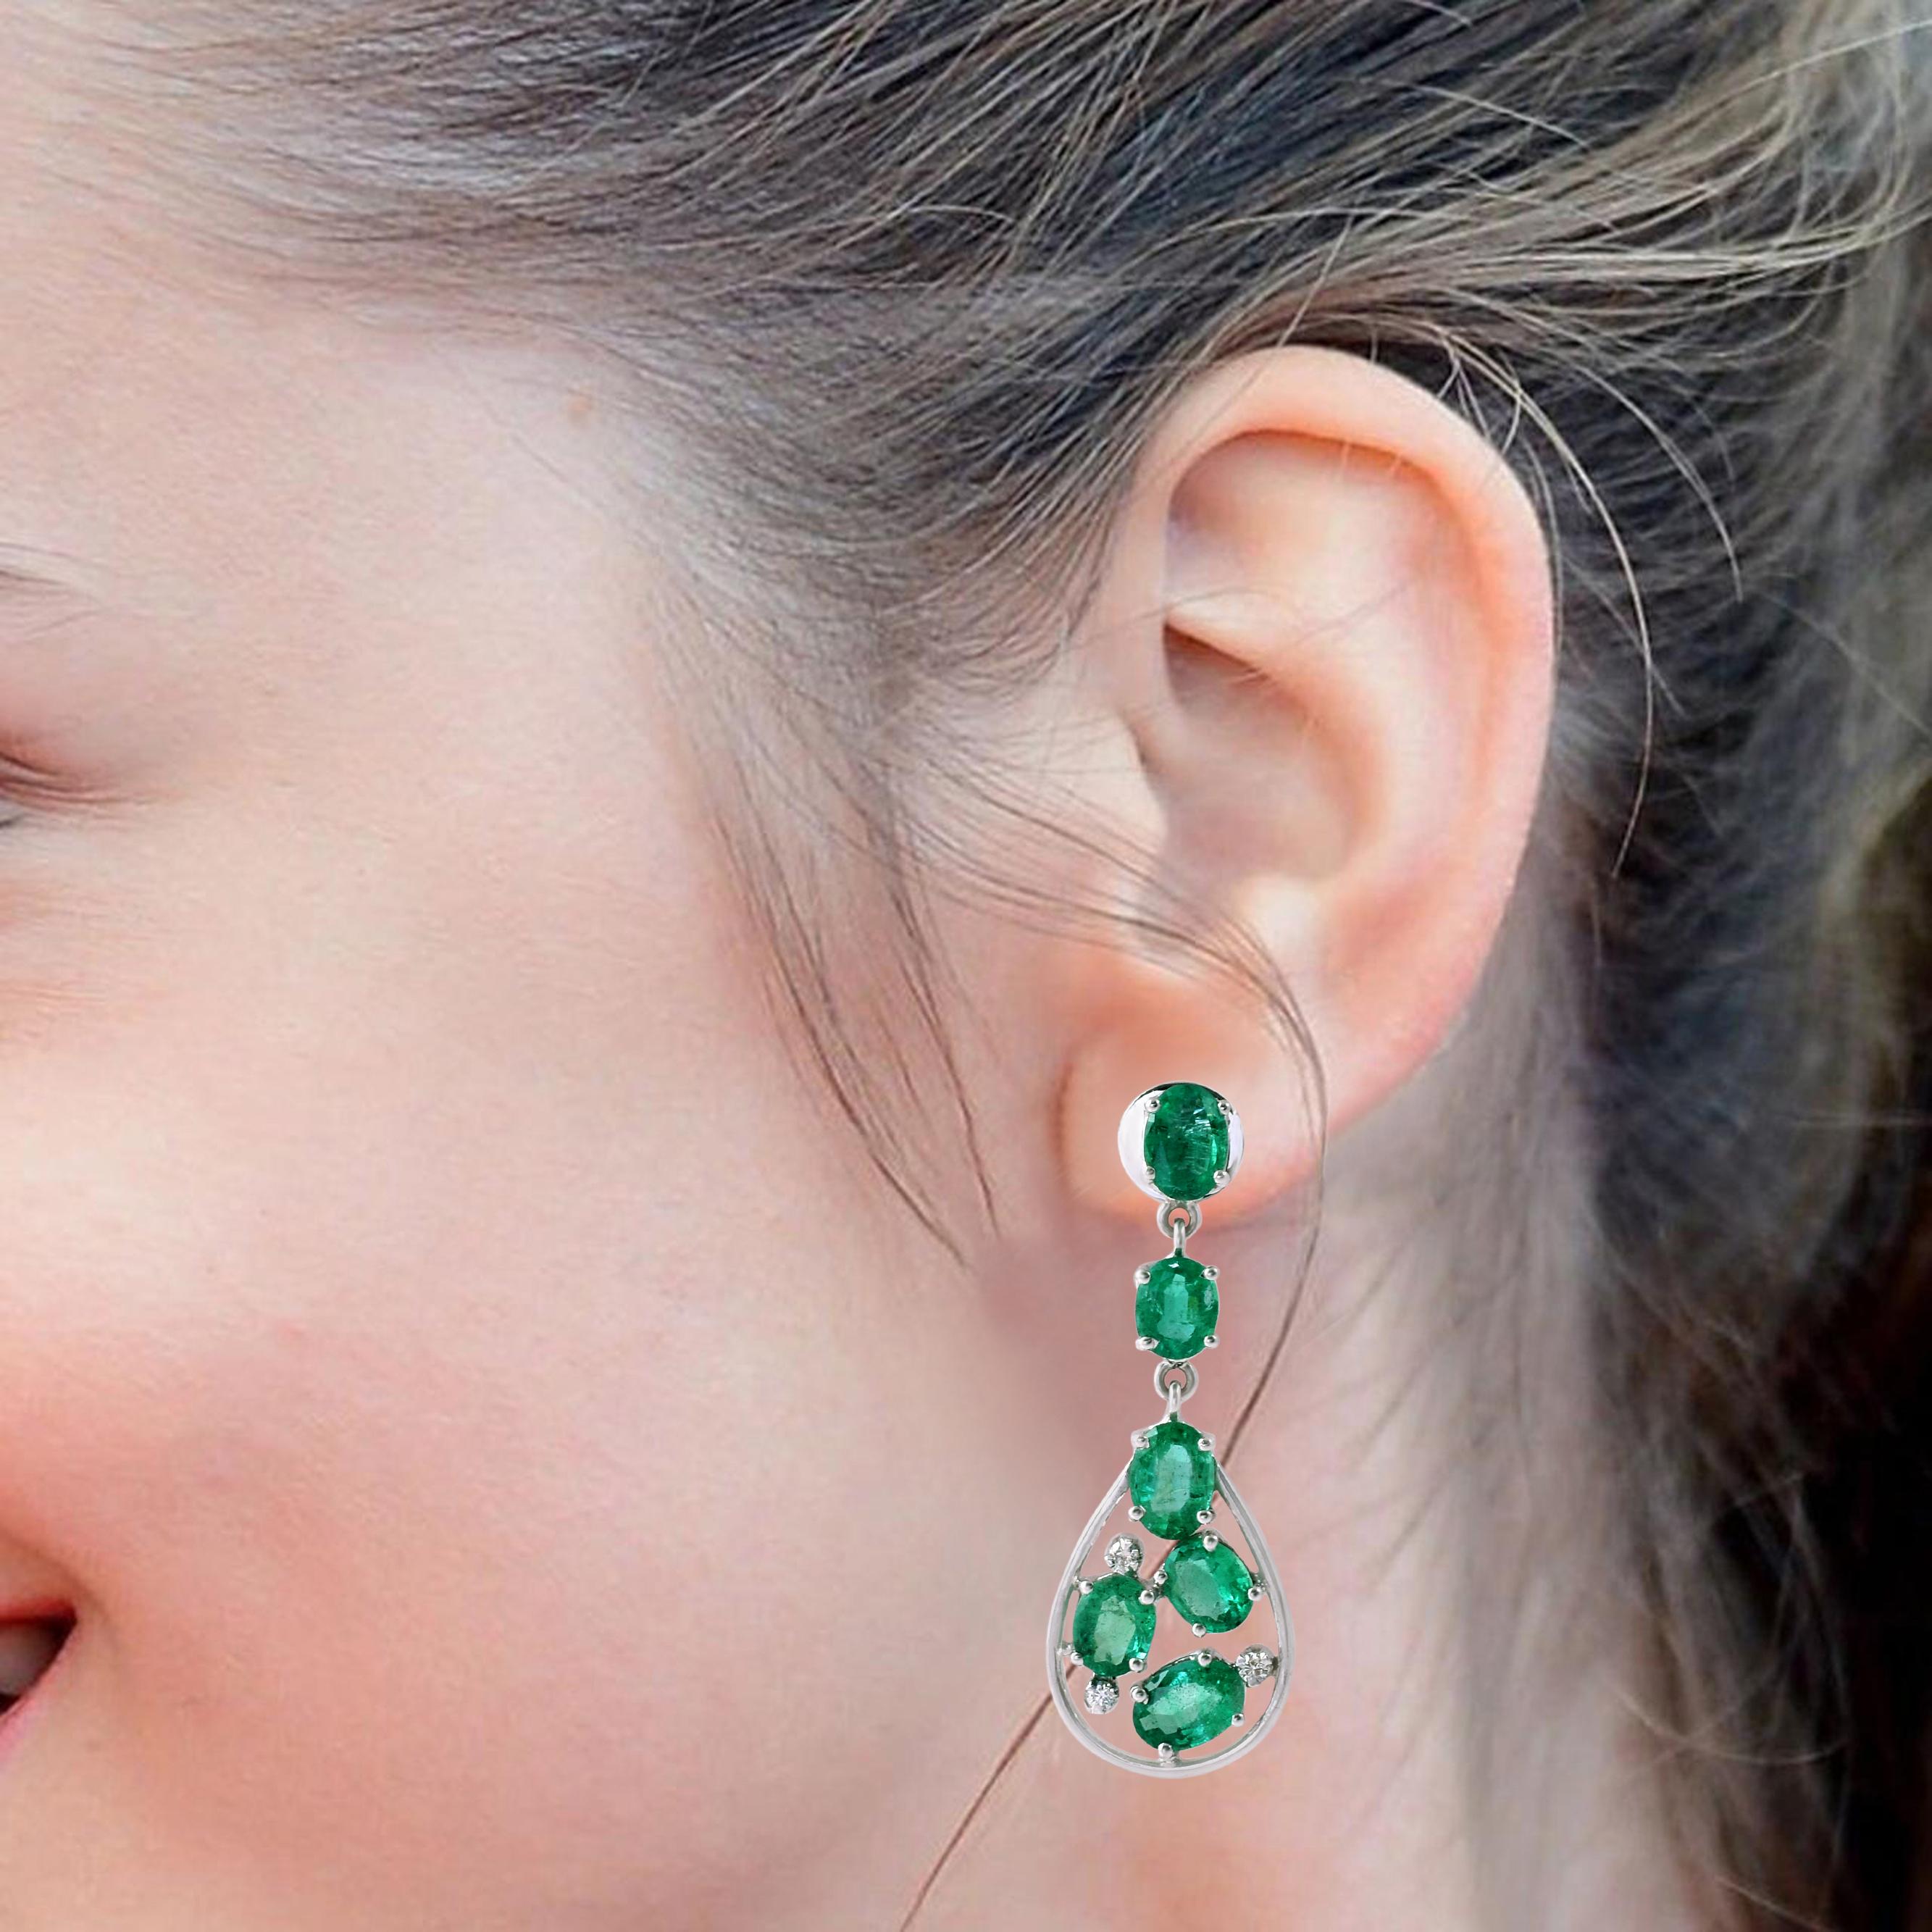 18 Karat White Gold 6.52 Carat Oval-Cut Emerald and Diamond Dangle Earrings

This ingenious forest green emerald and diamond long earring is monumental. The striking open pear shape at the bottom created through the thin white gold border with